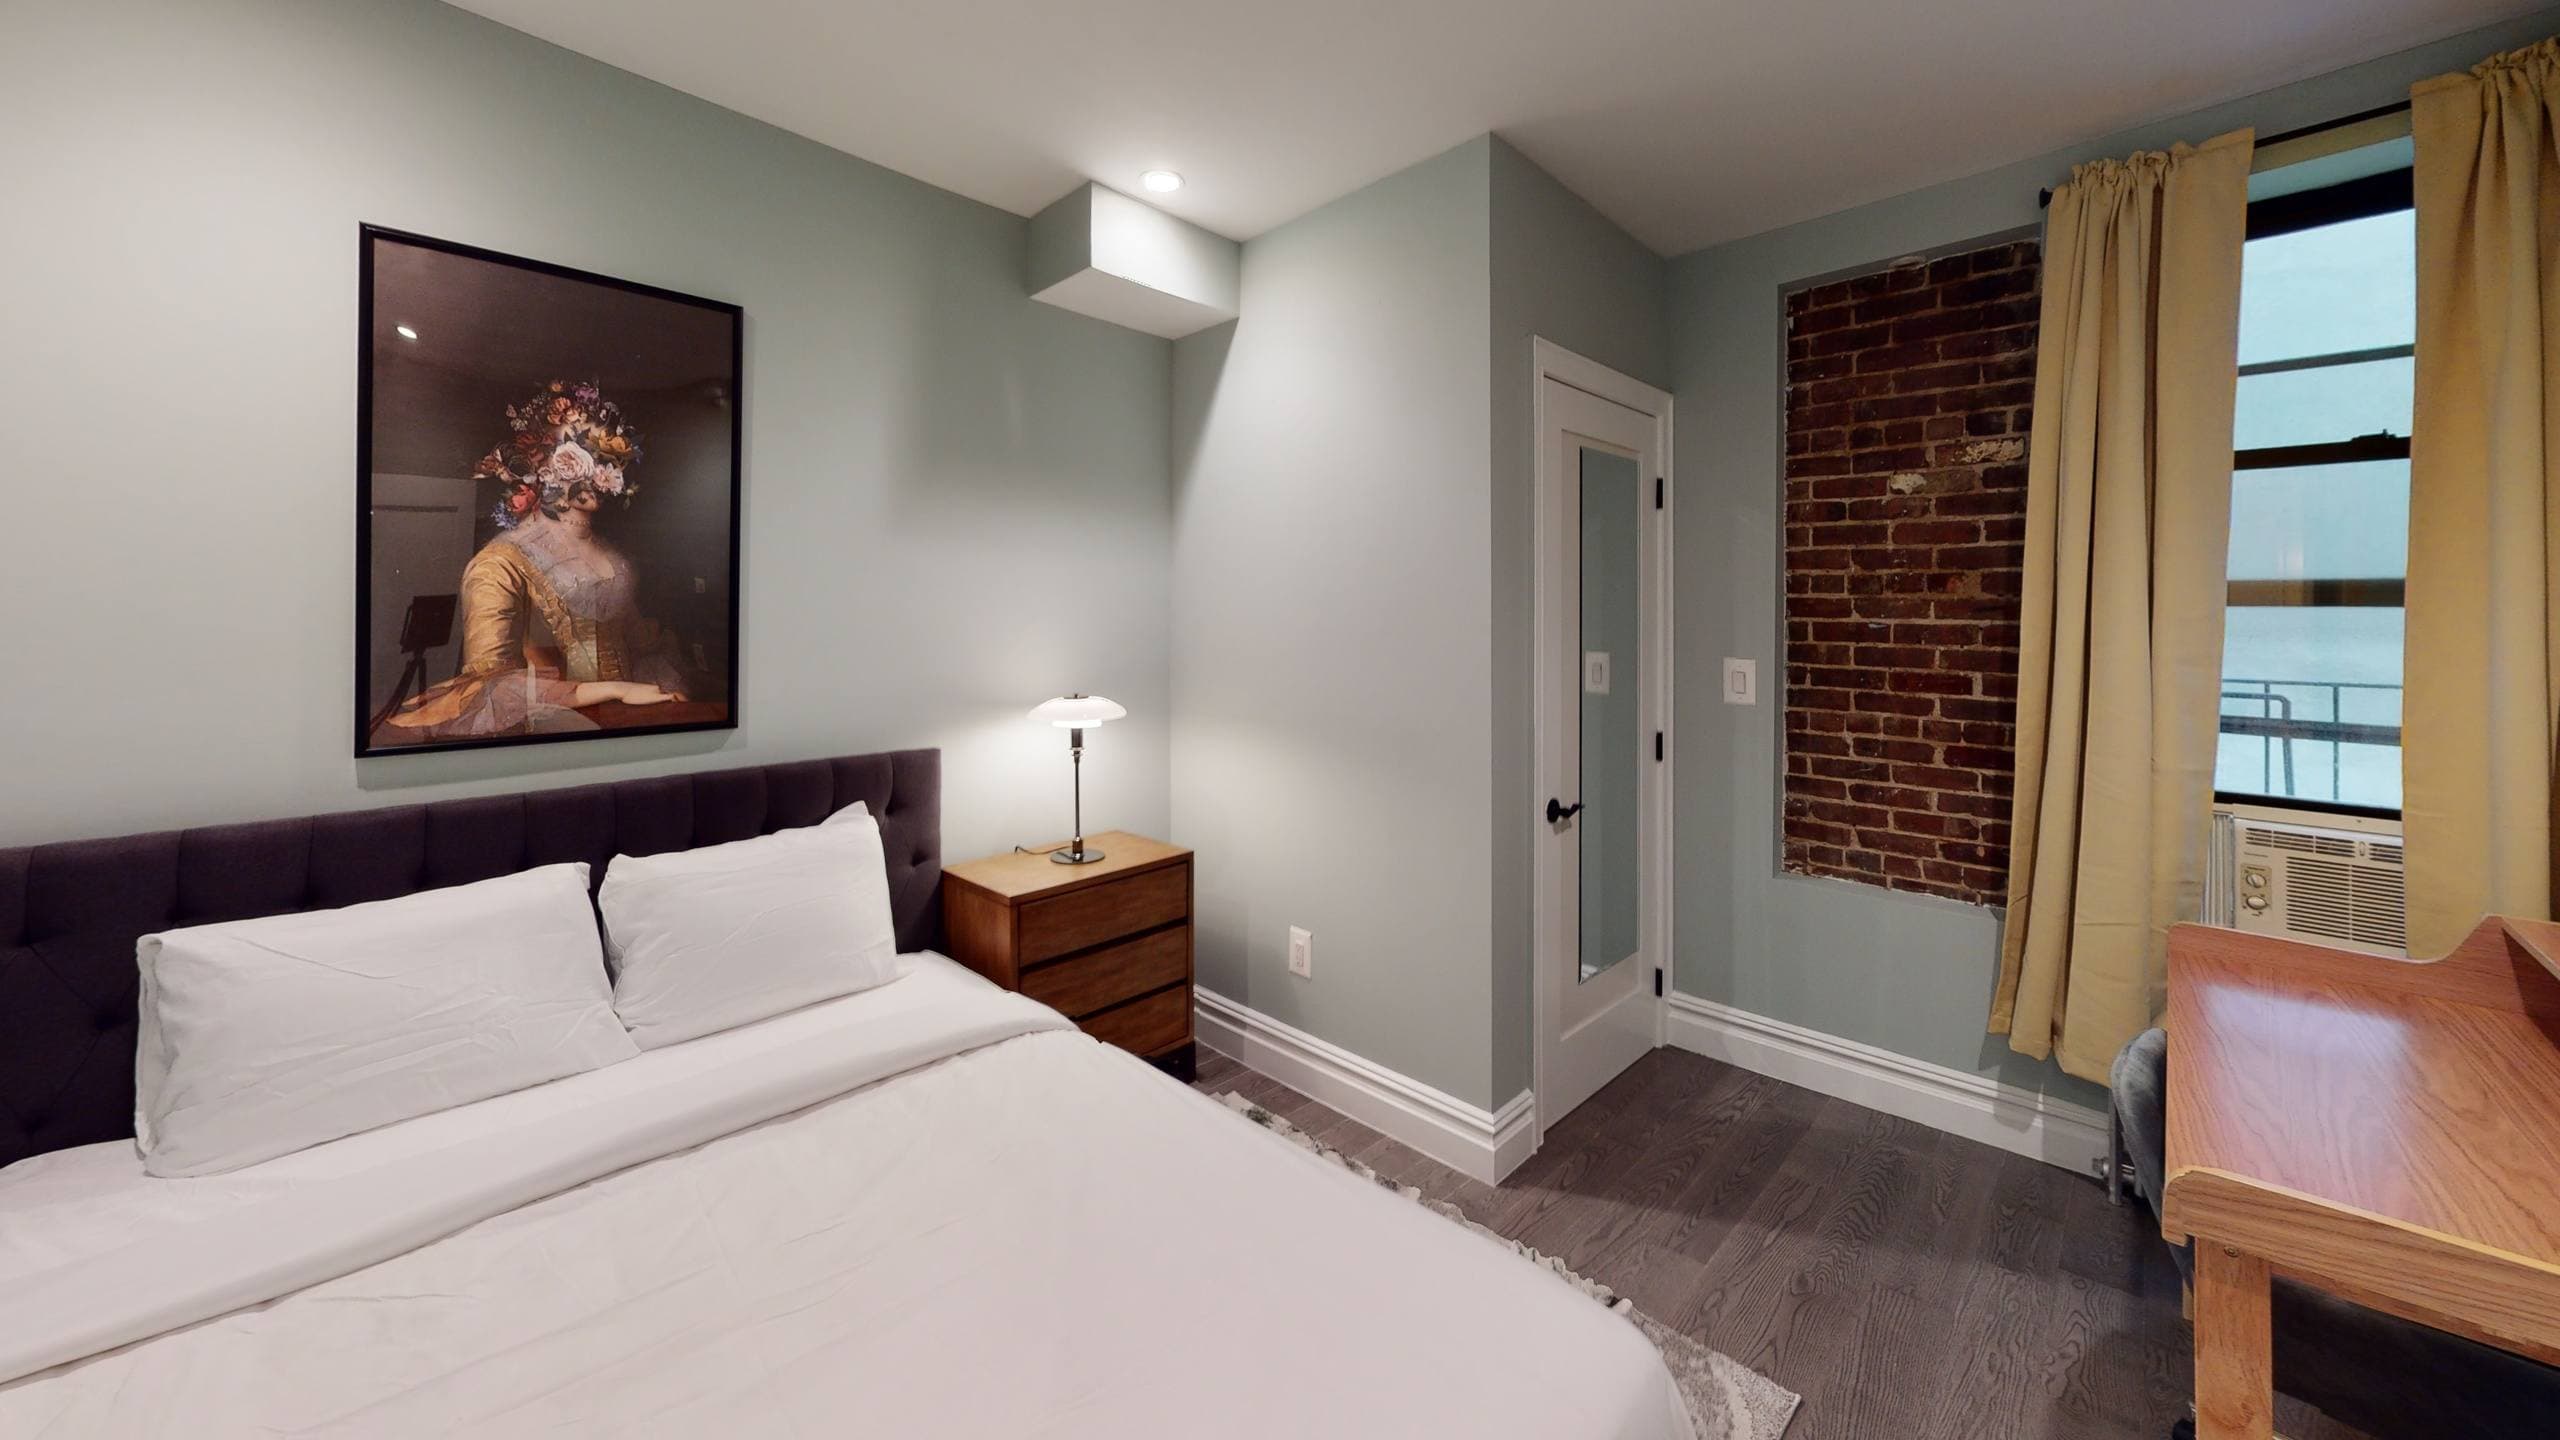 Photo 2 of #1527: Queen Bedroom A at June Homes